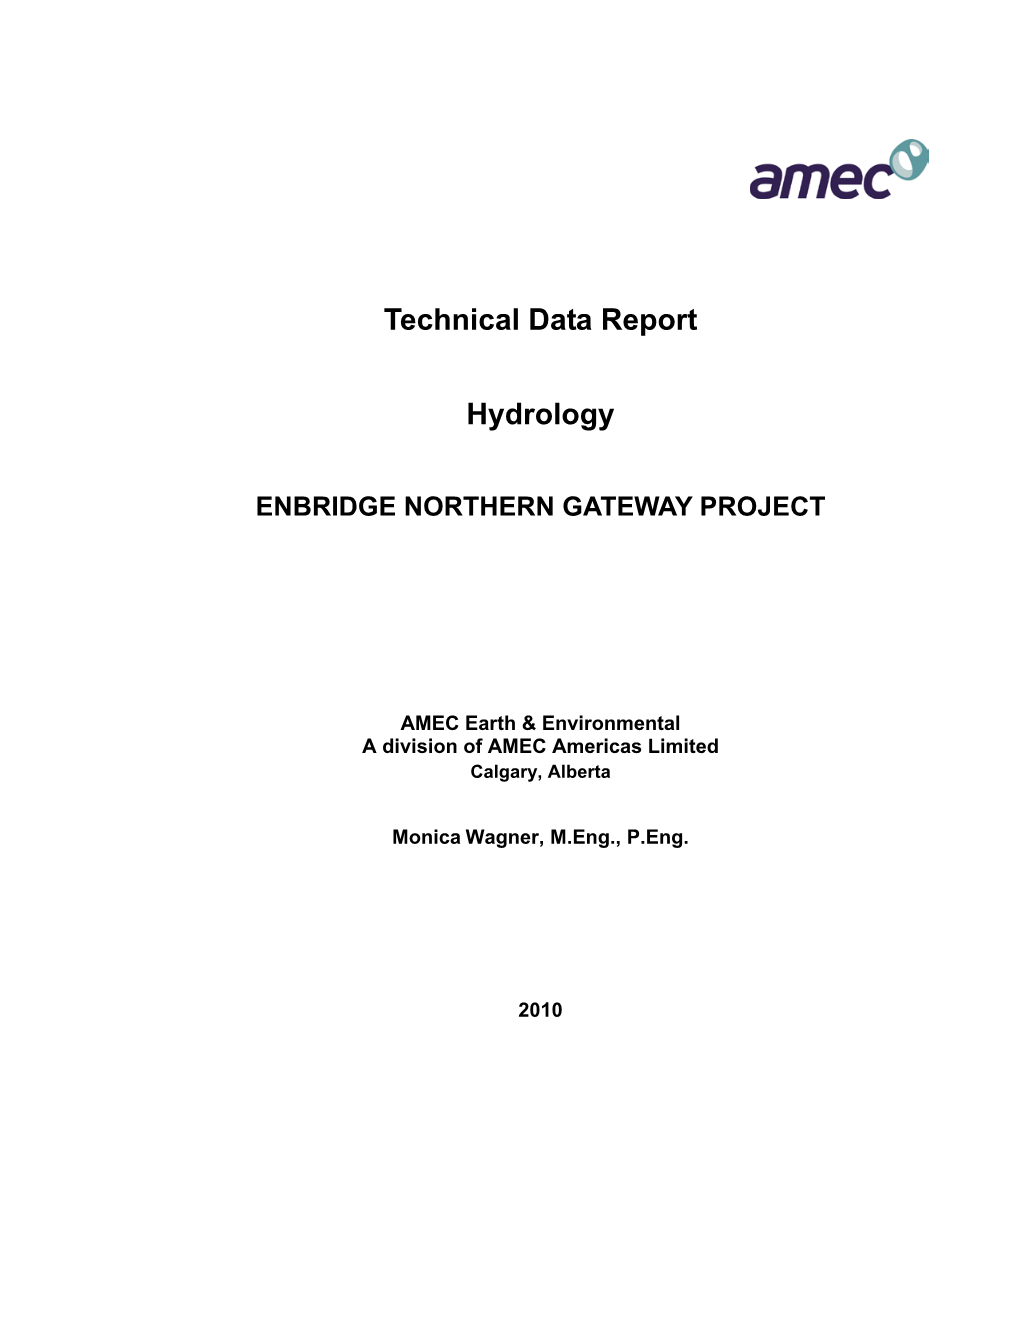 Technical Data Report Hydrology